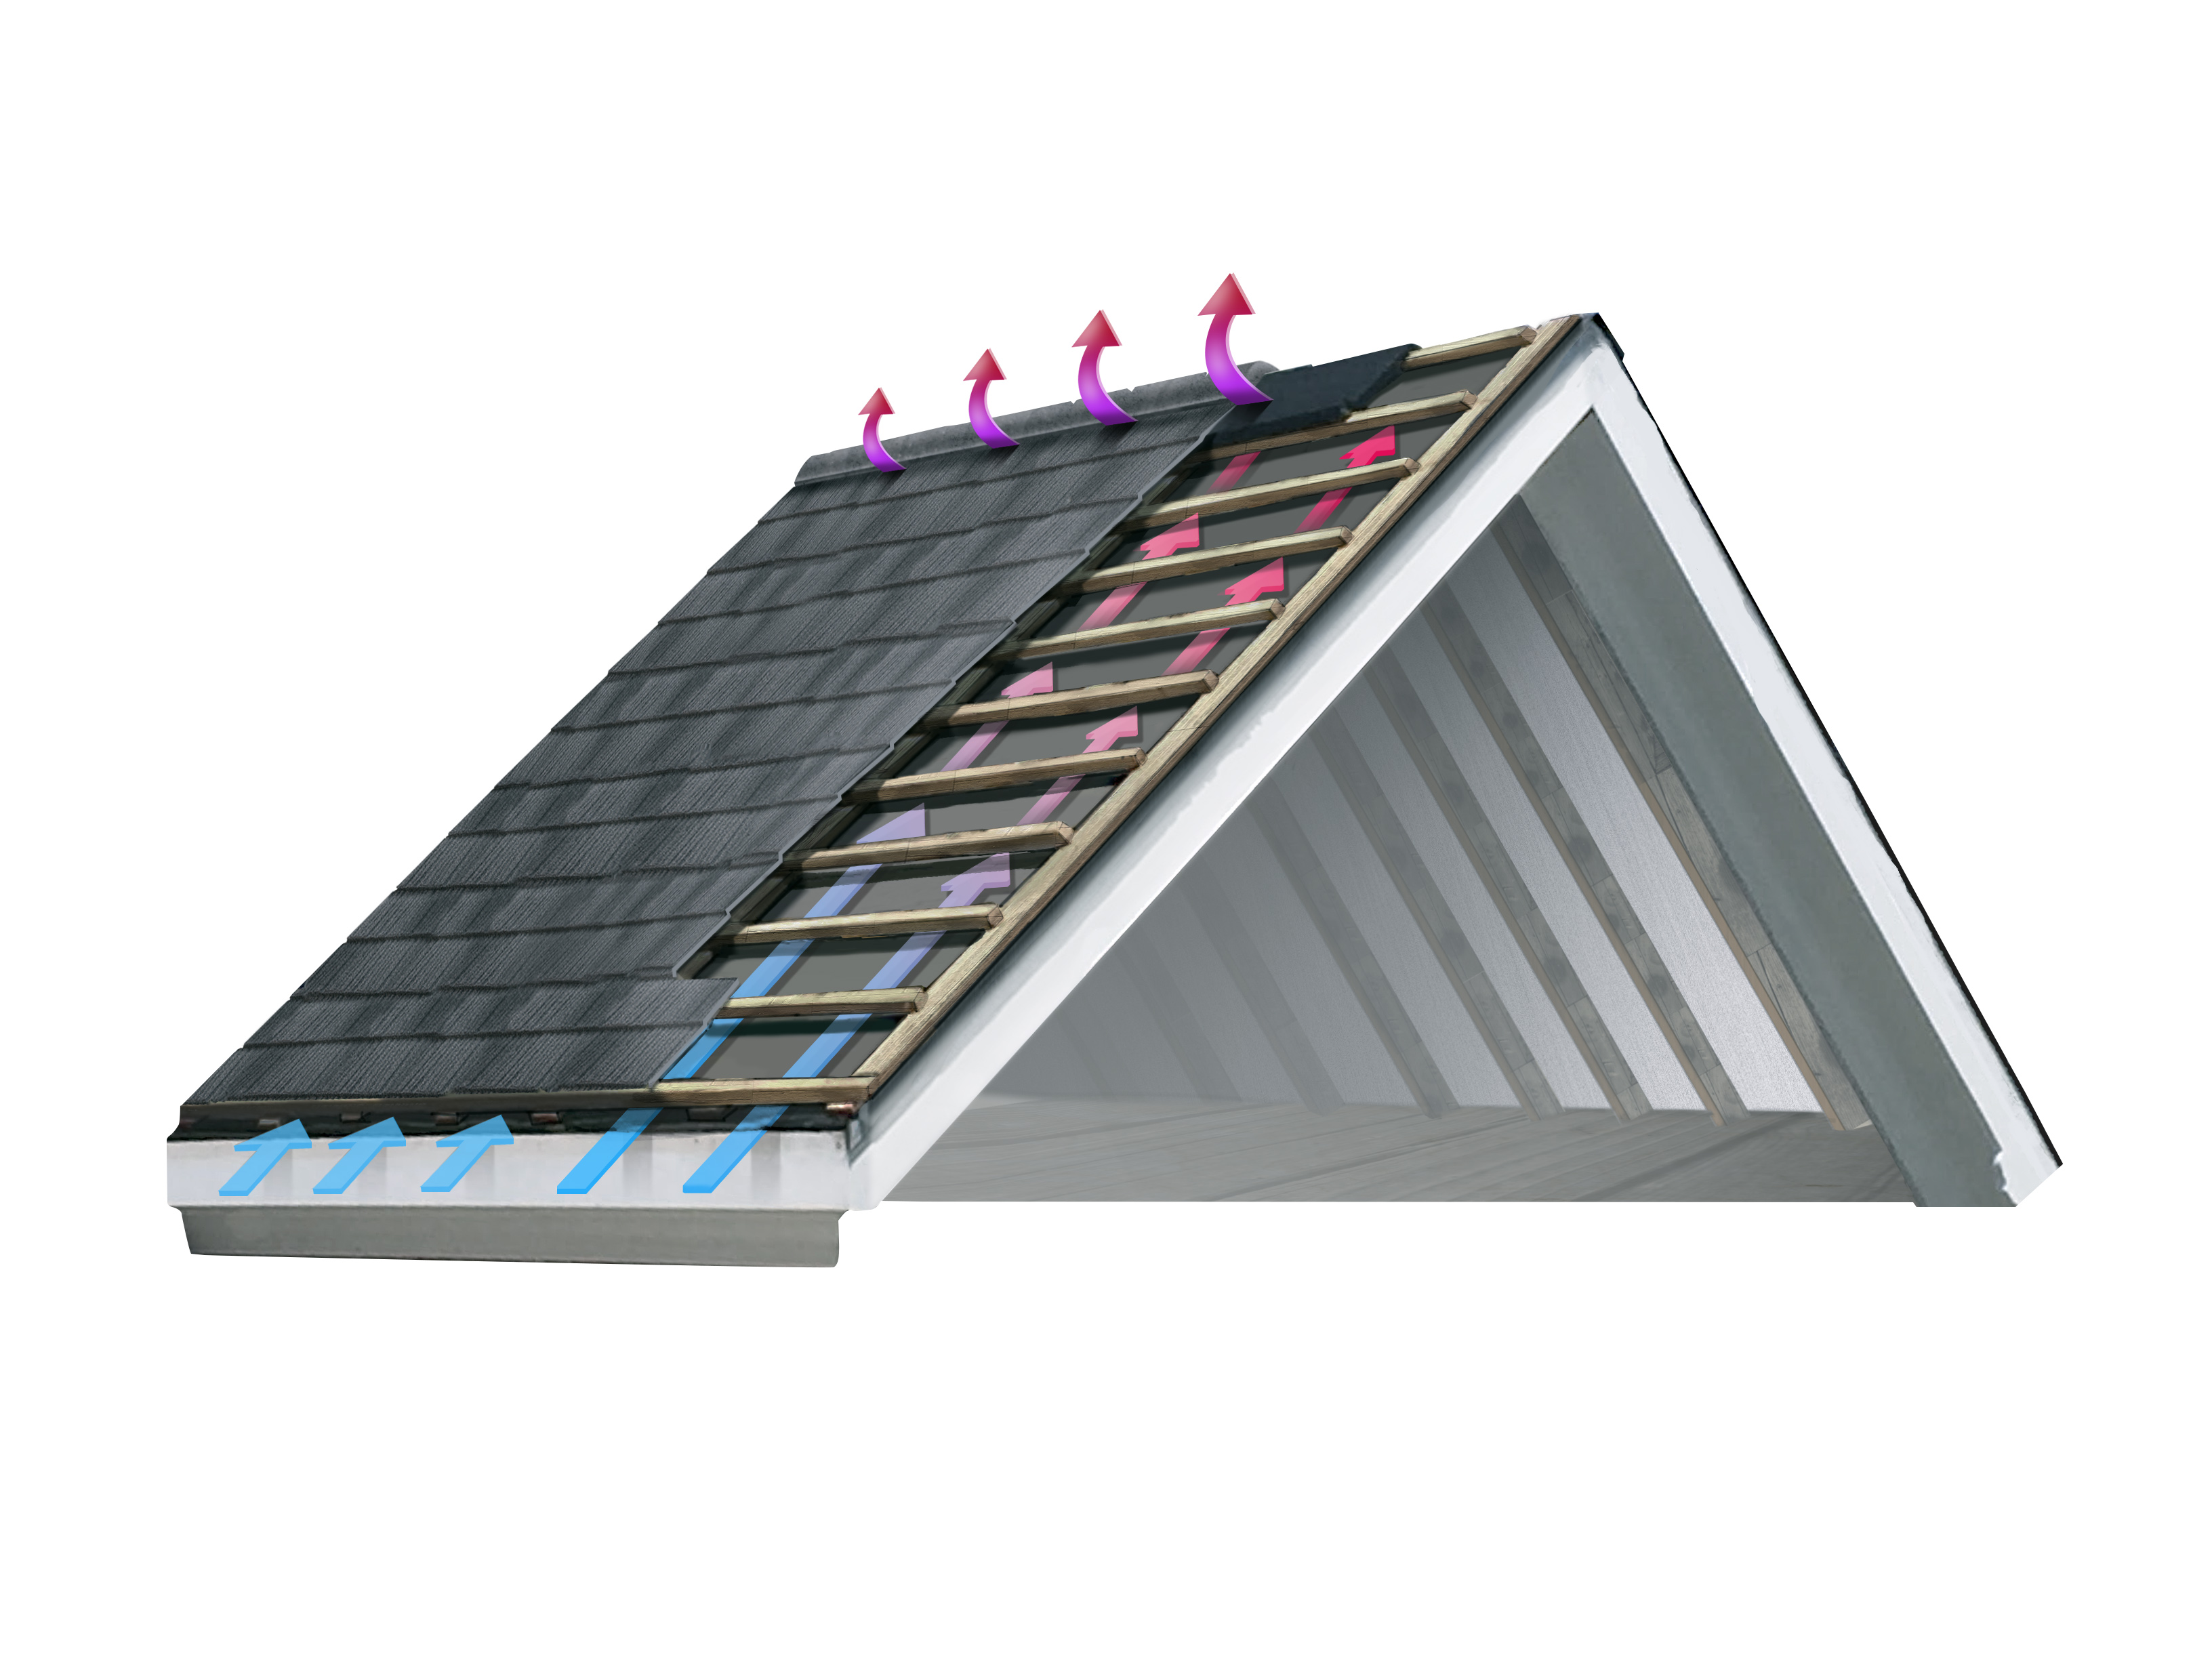 Image of a roof showing how the air flows with Above Sheathing Ventilation (ASV)